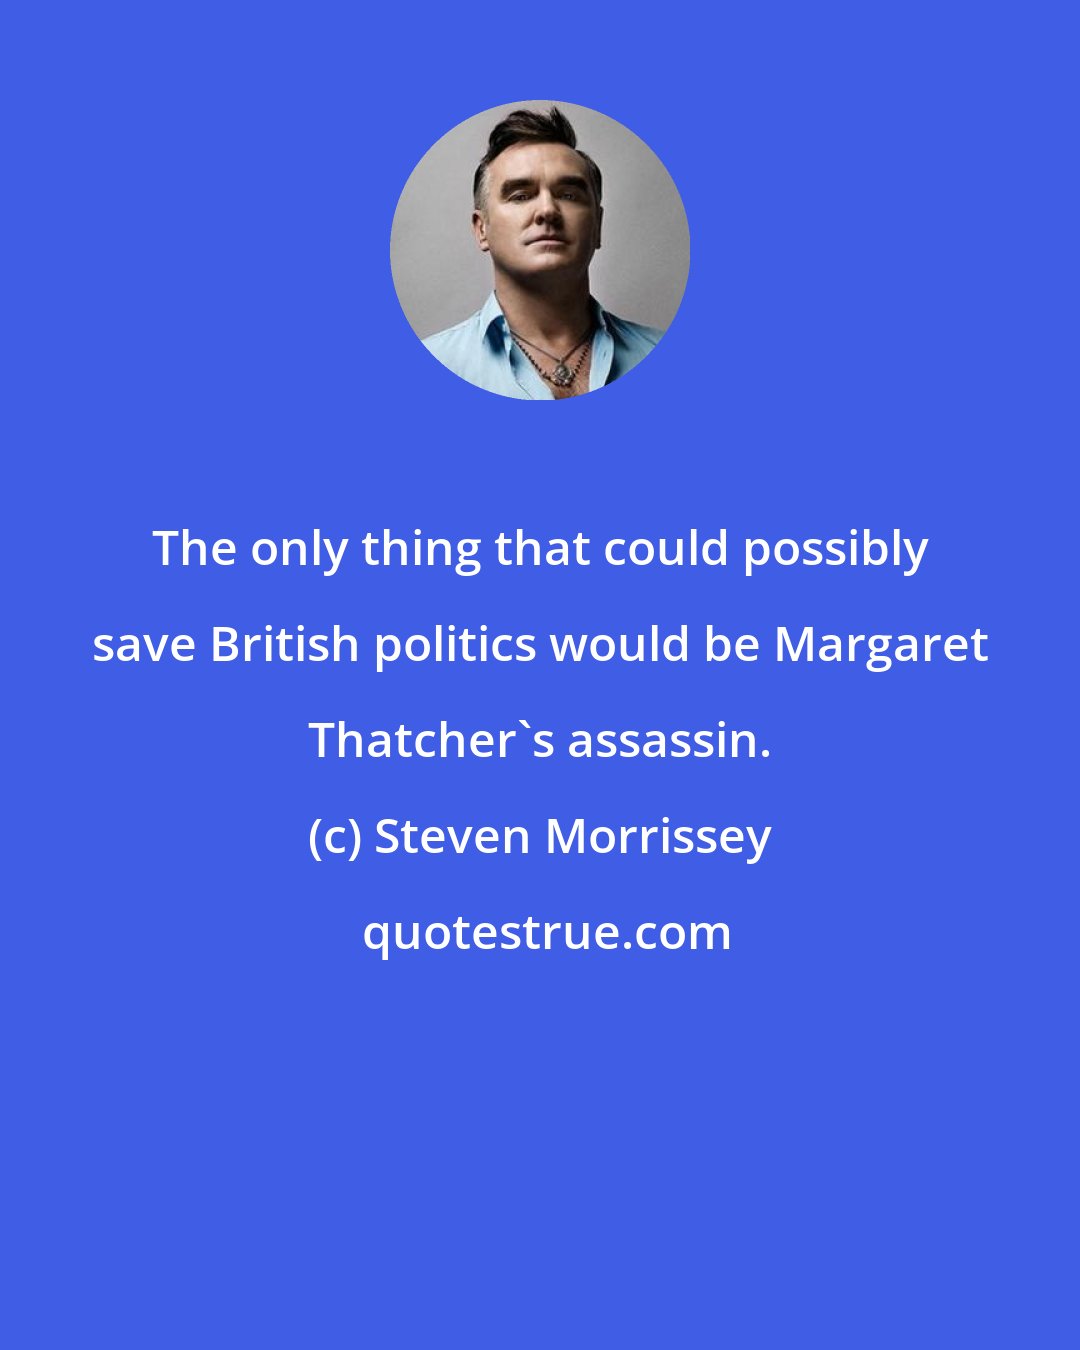 Steven Morrissey: The only thing that could possibly save British politics would be Margaret Thatcher's assassin.